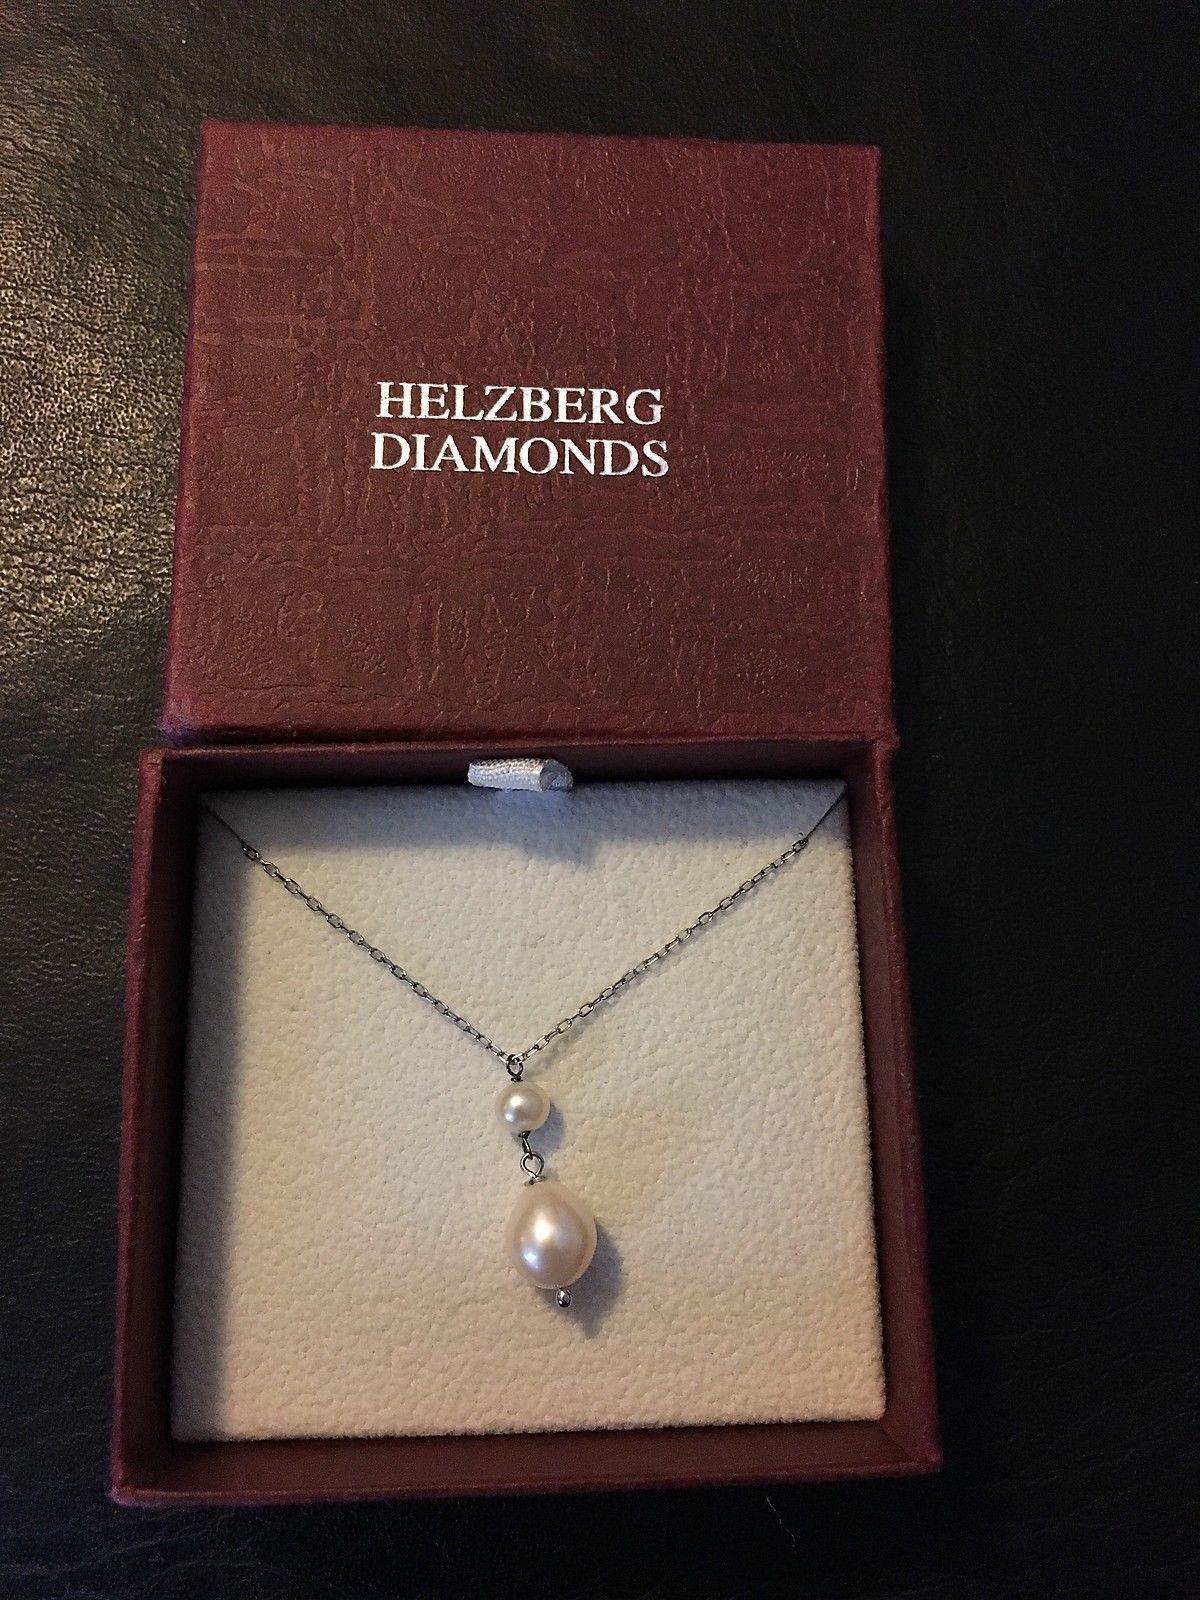 Primary image for Helzberg Diamonds White Cultured Pearl Sterling Silver Pendant Necklace 